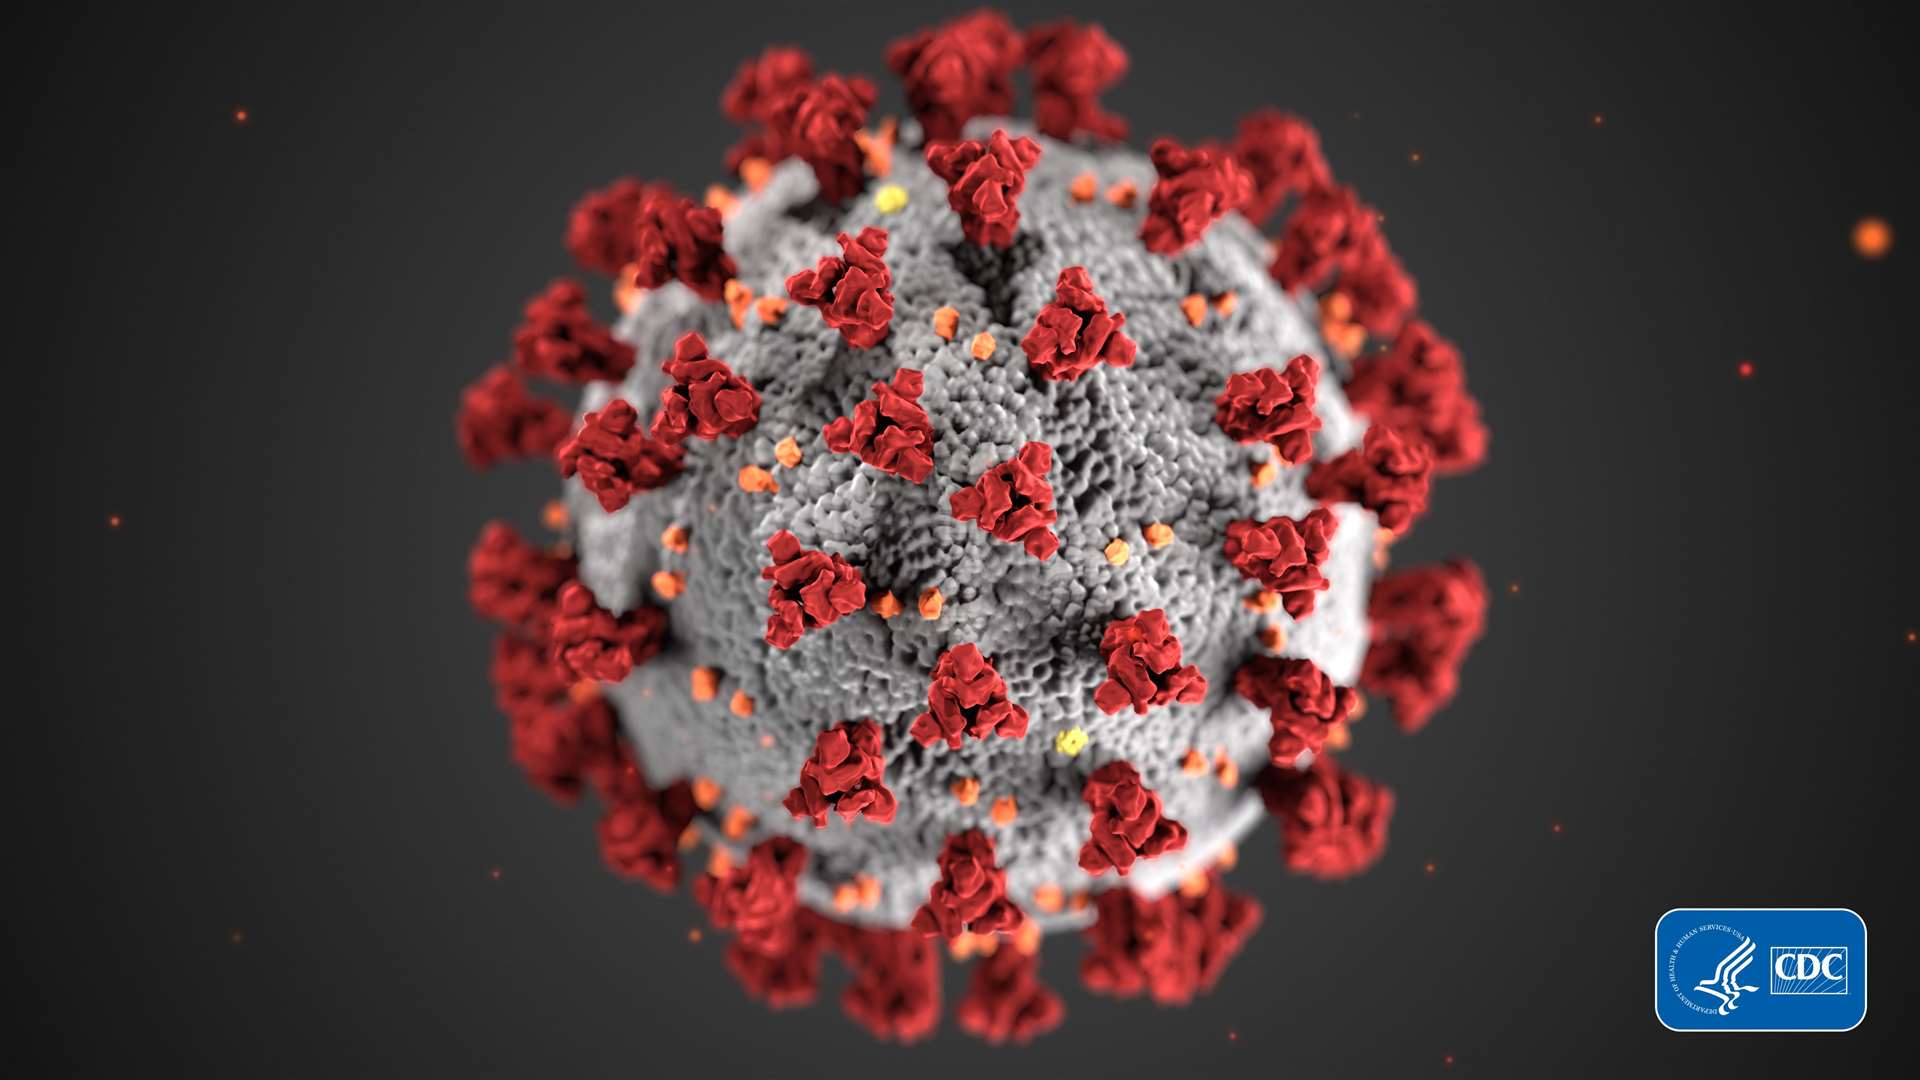 An impression of Covid-19, also known as coronavirus.